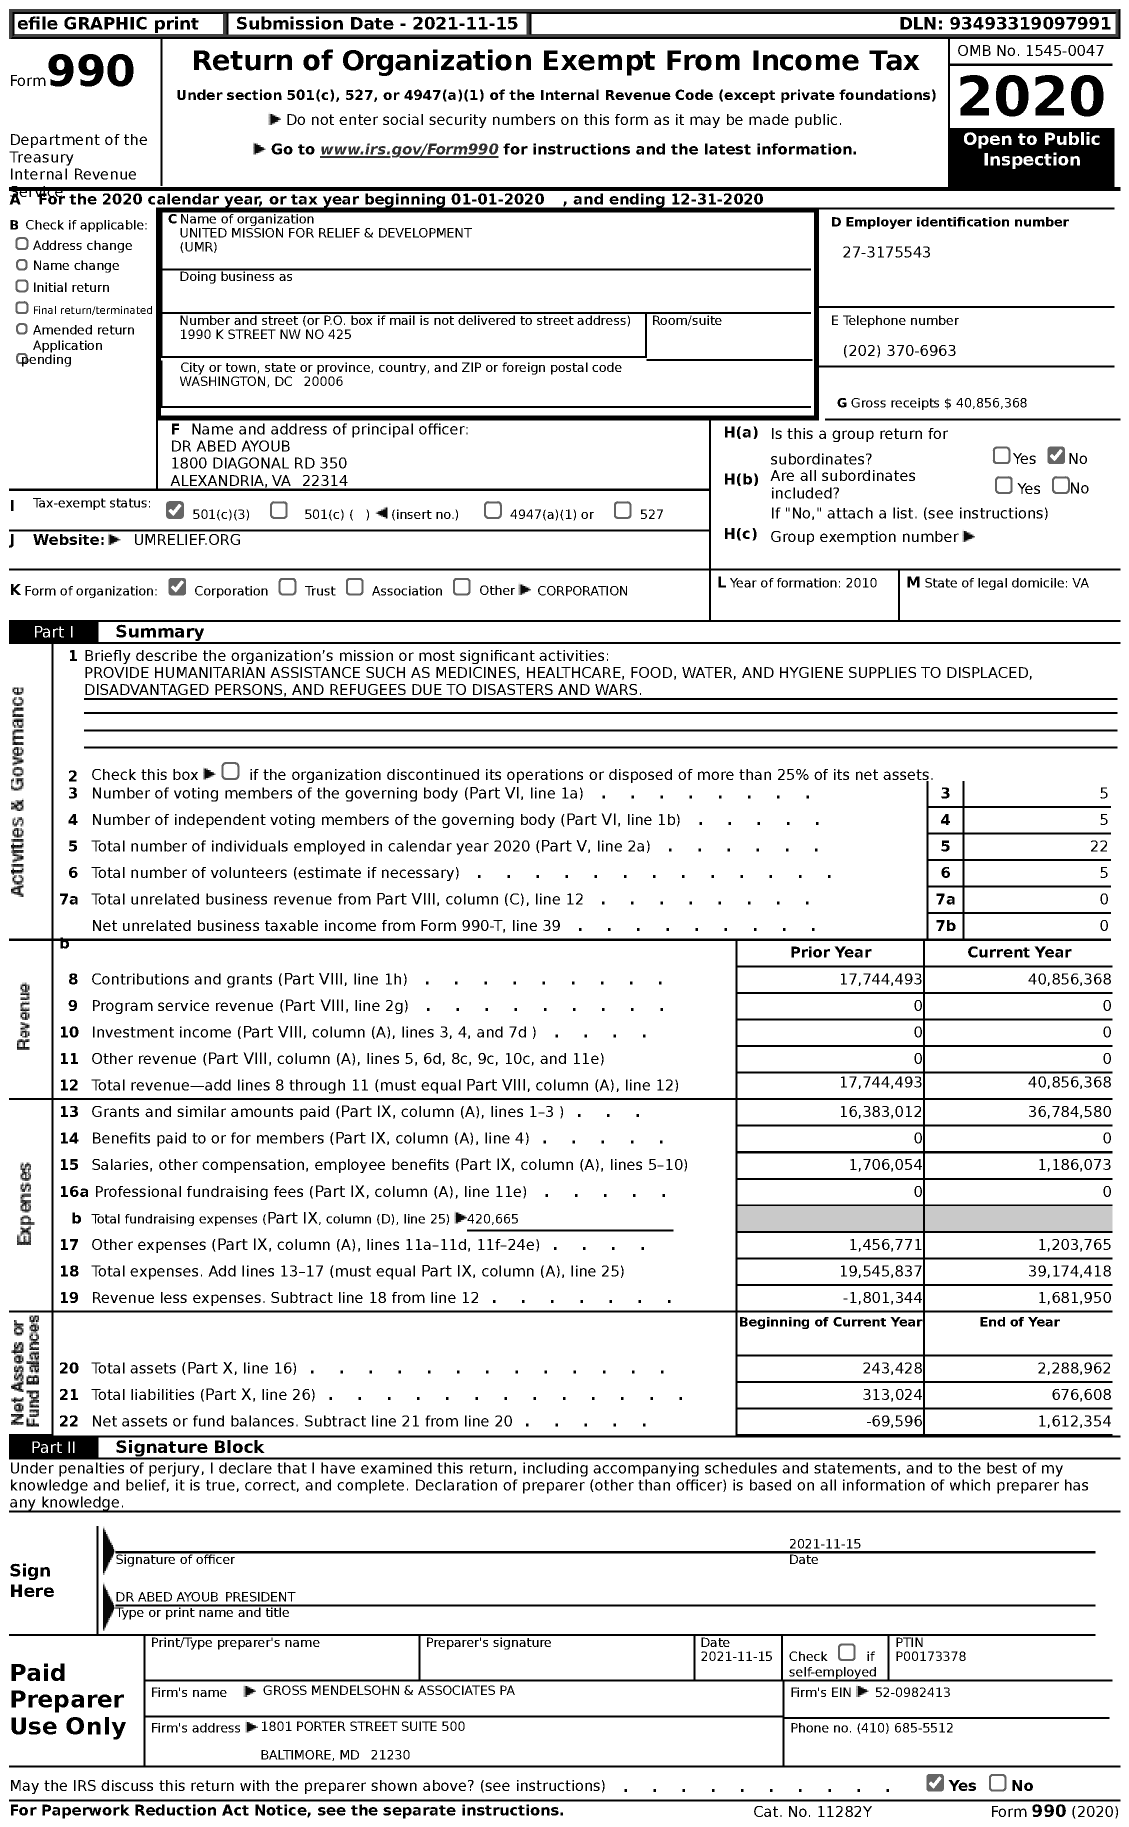 Image of first page of 2020 Form 990 for United Mission For Relief & Development (UMR)